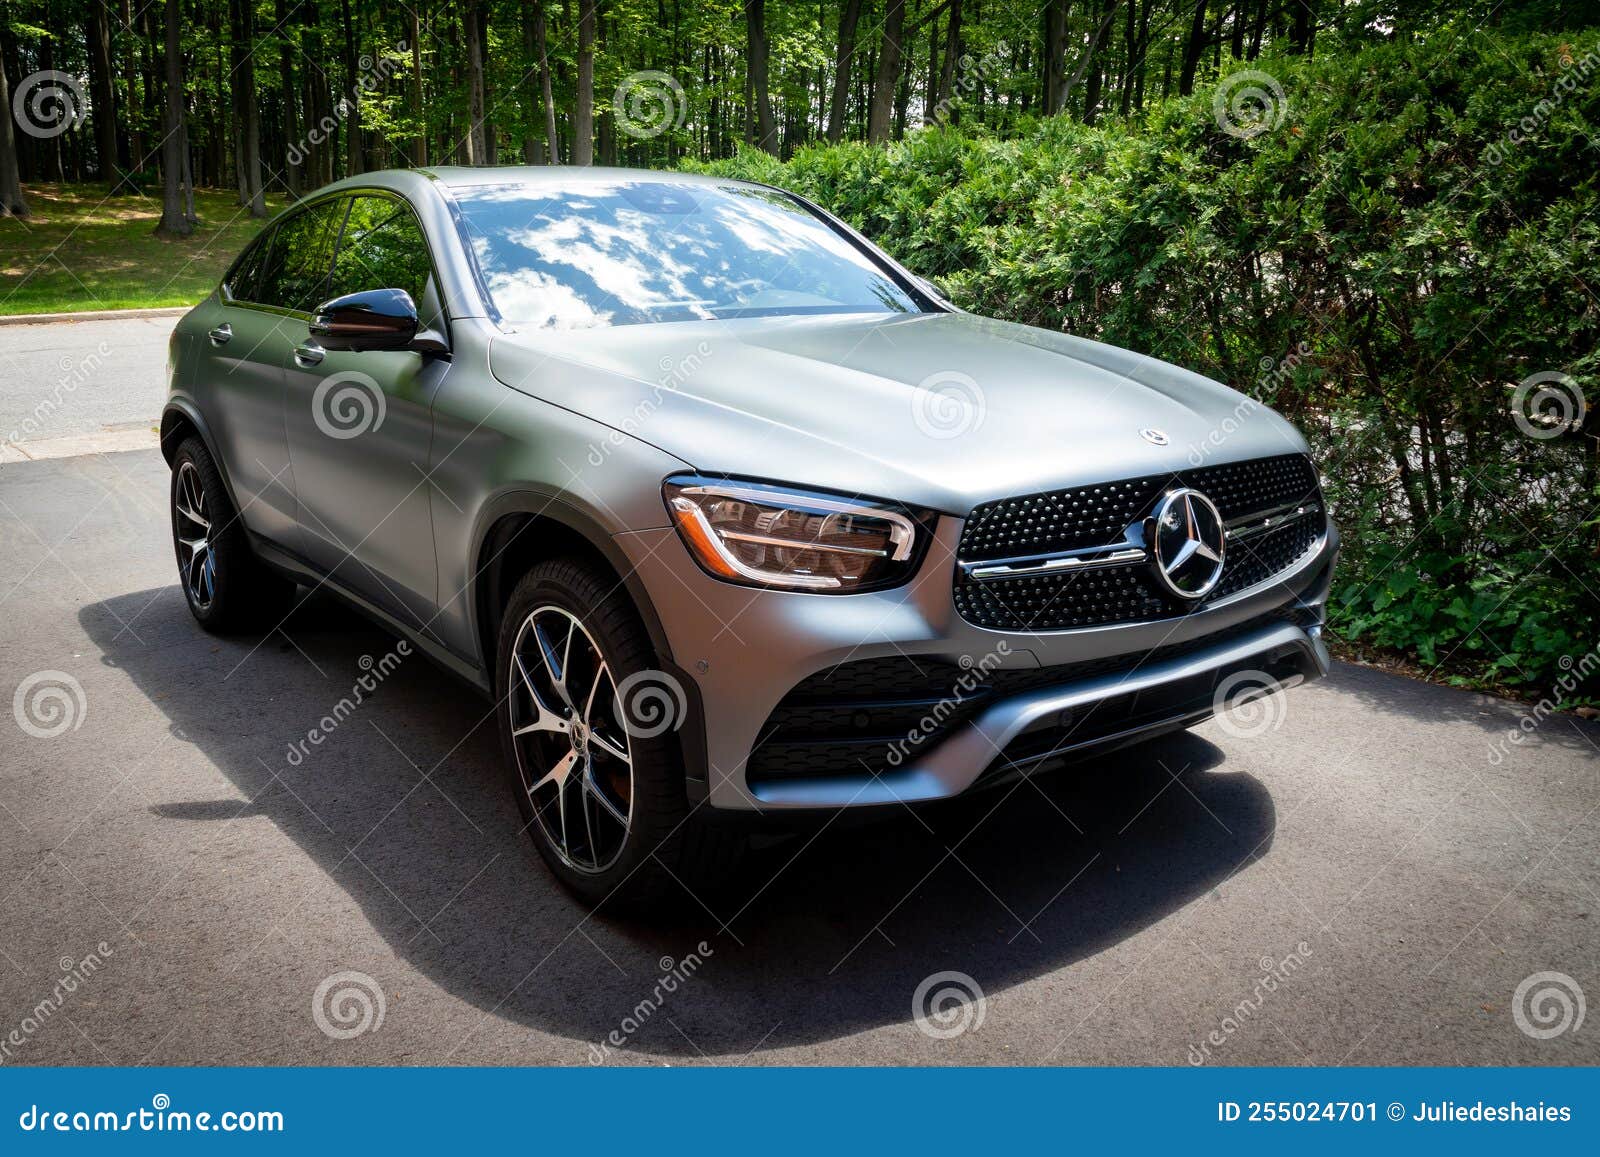 Mercedez-Benz GLC 300 4Matic Coupe 2022 Matte Grey Car Editorial Photo -  Image of exhibition, front: 255024701